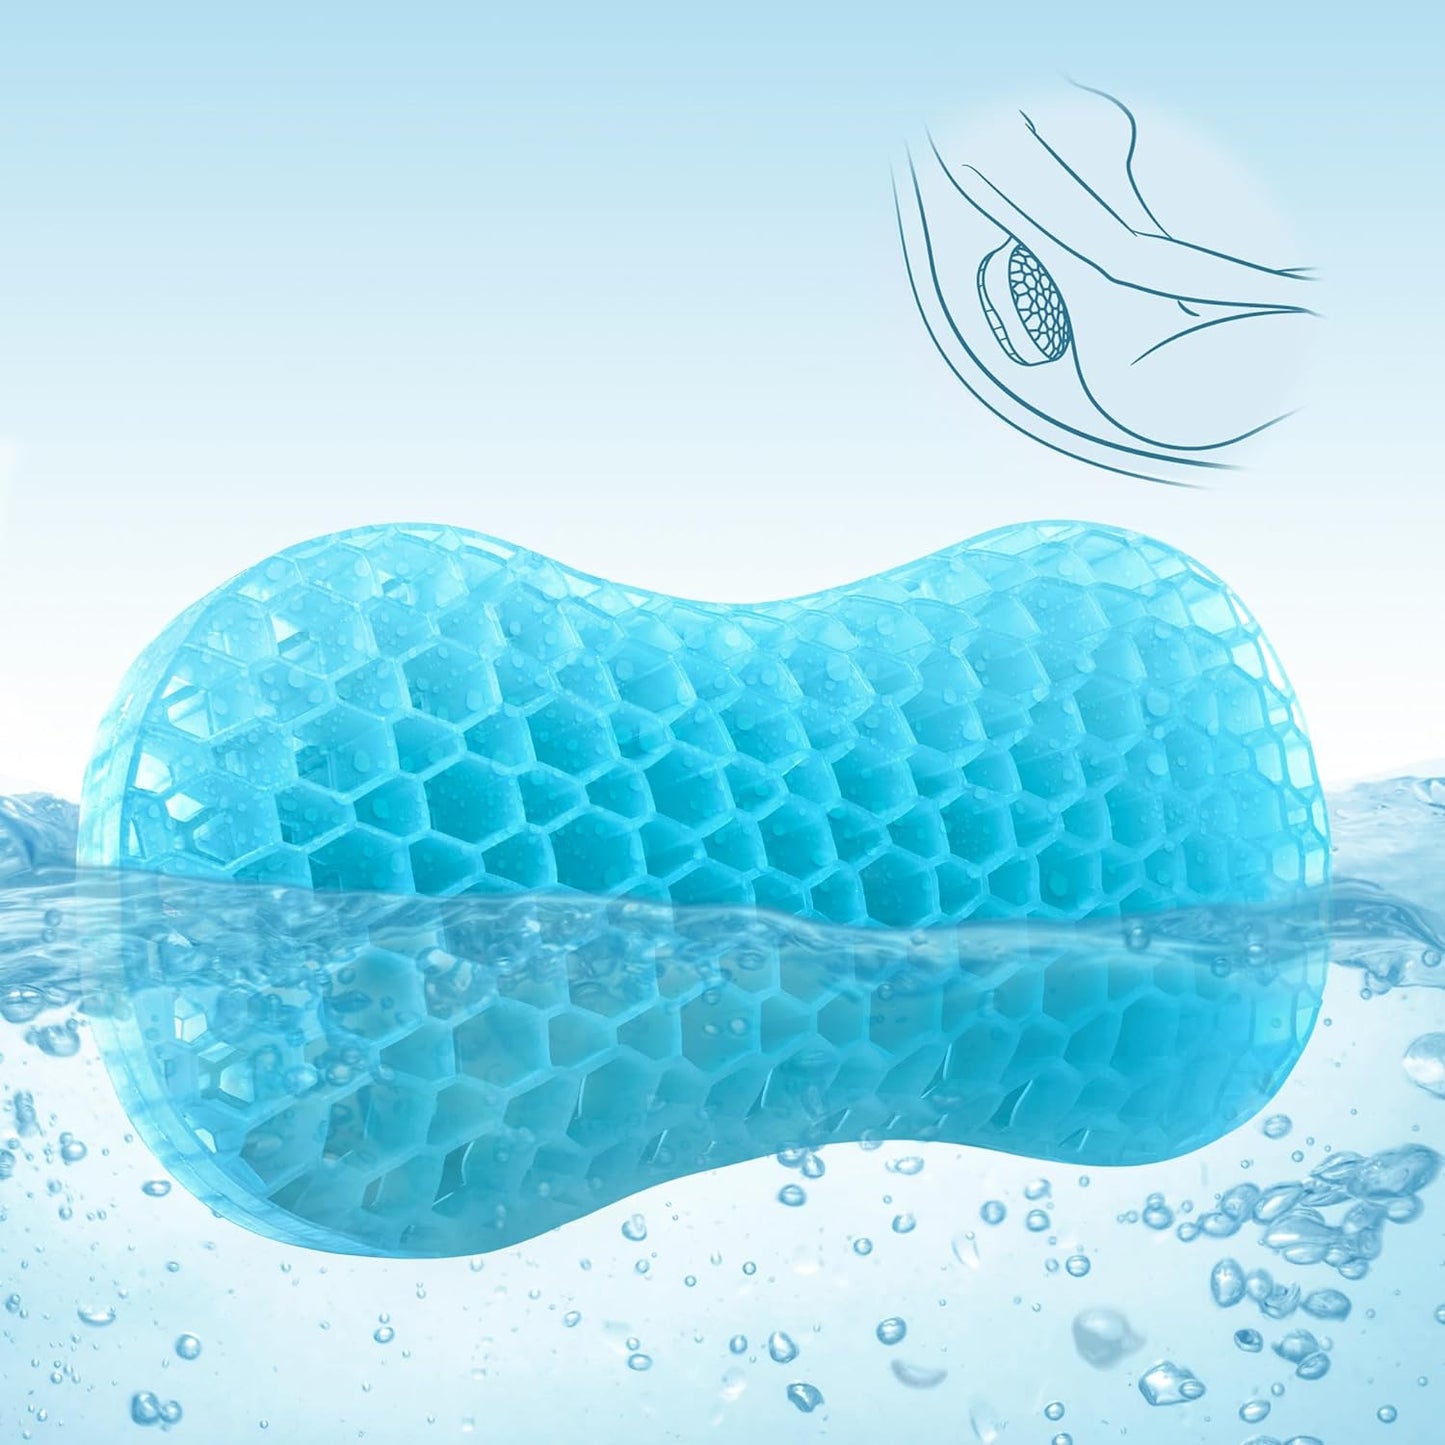 Sunlit Bath Jello Gel Bath Pillows, Lumbar Pillow for Bathtub, Back Support Pillow, Gel Pillow with Non-Slip Suction Cups for Lumbar, Back Rest Support, Fits Curved or Straight Back Tubs, Aqua